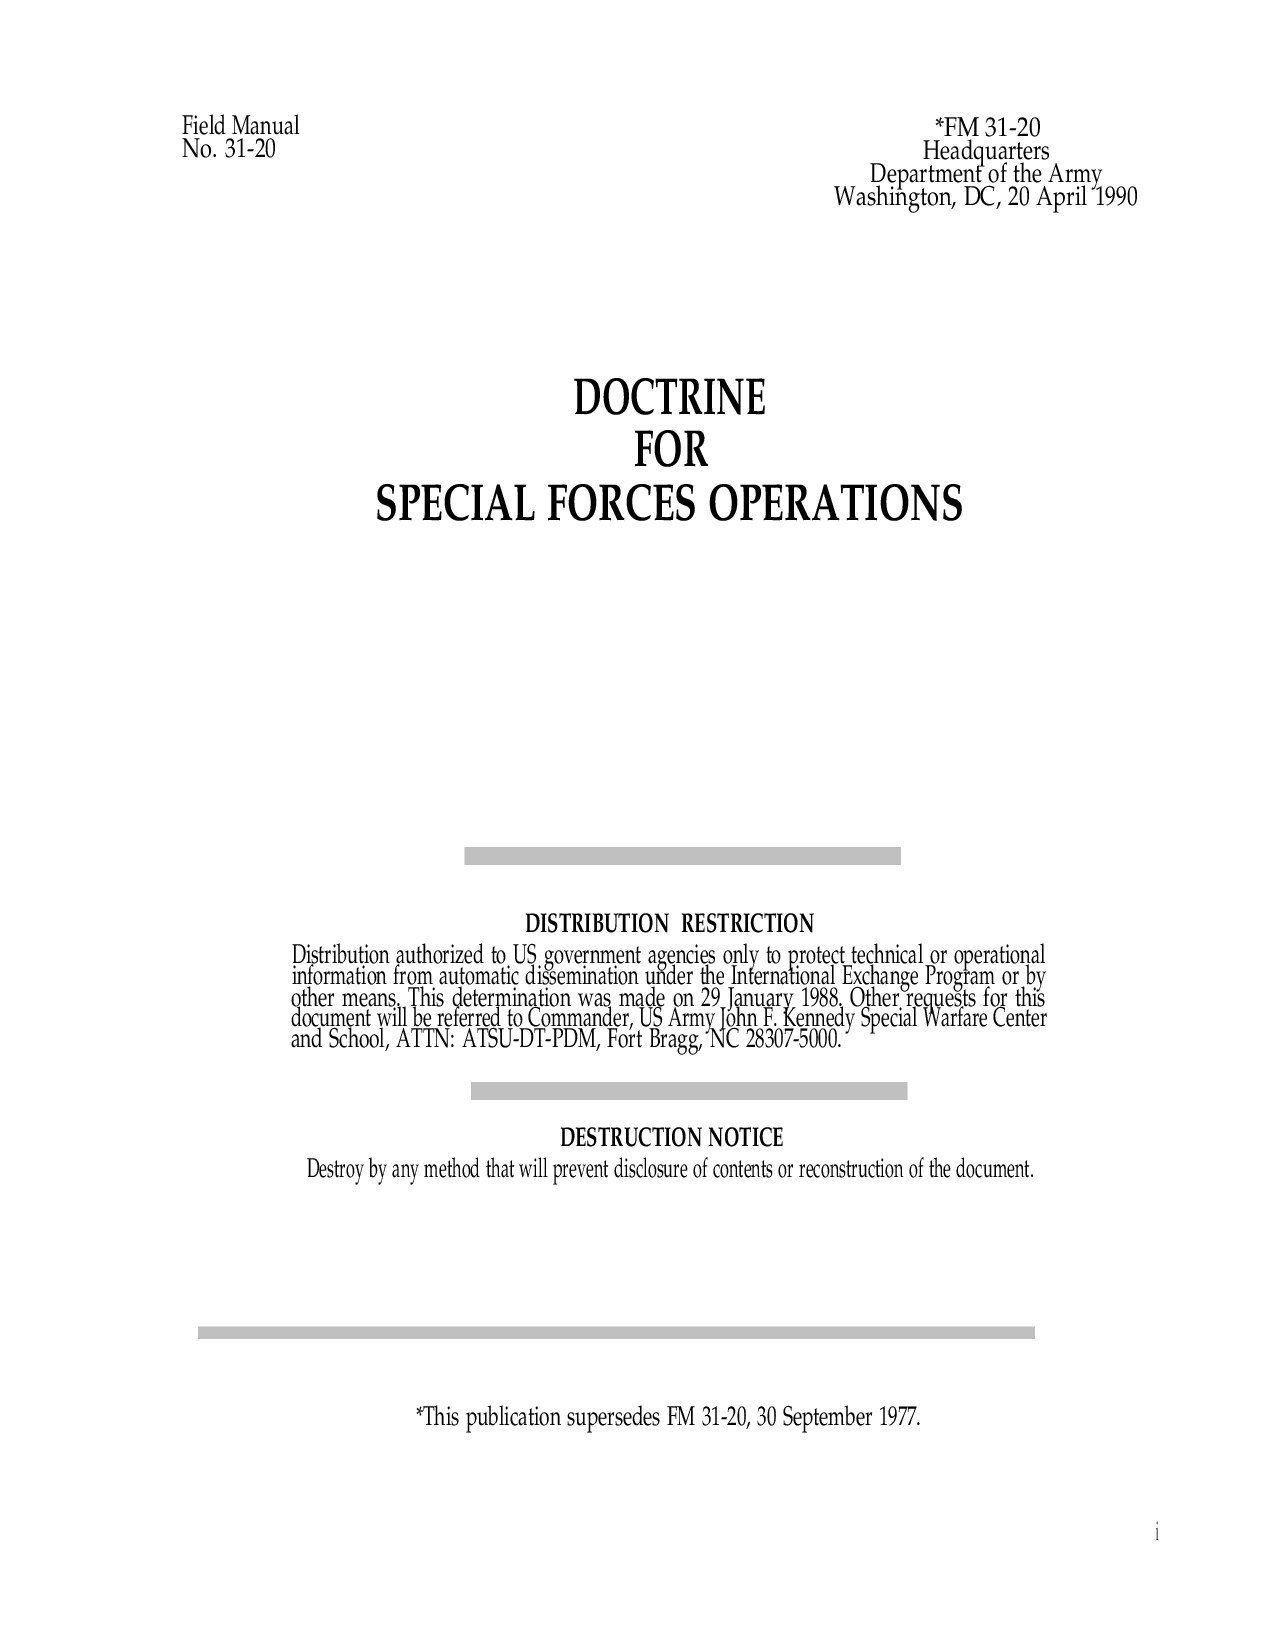 FM 31-20 Doctrine for Special Forces Operations